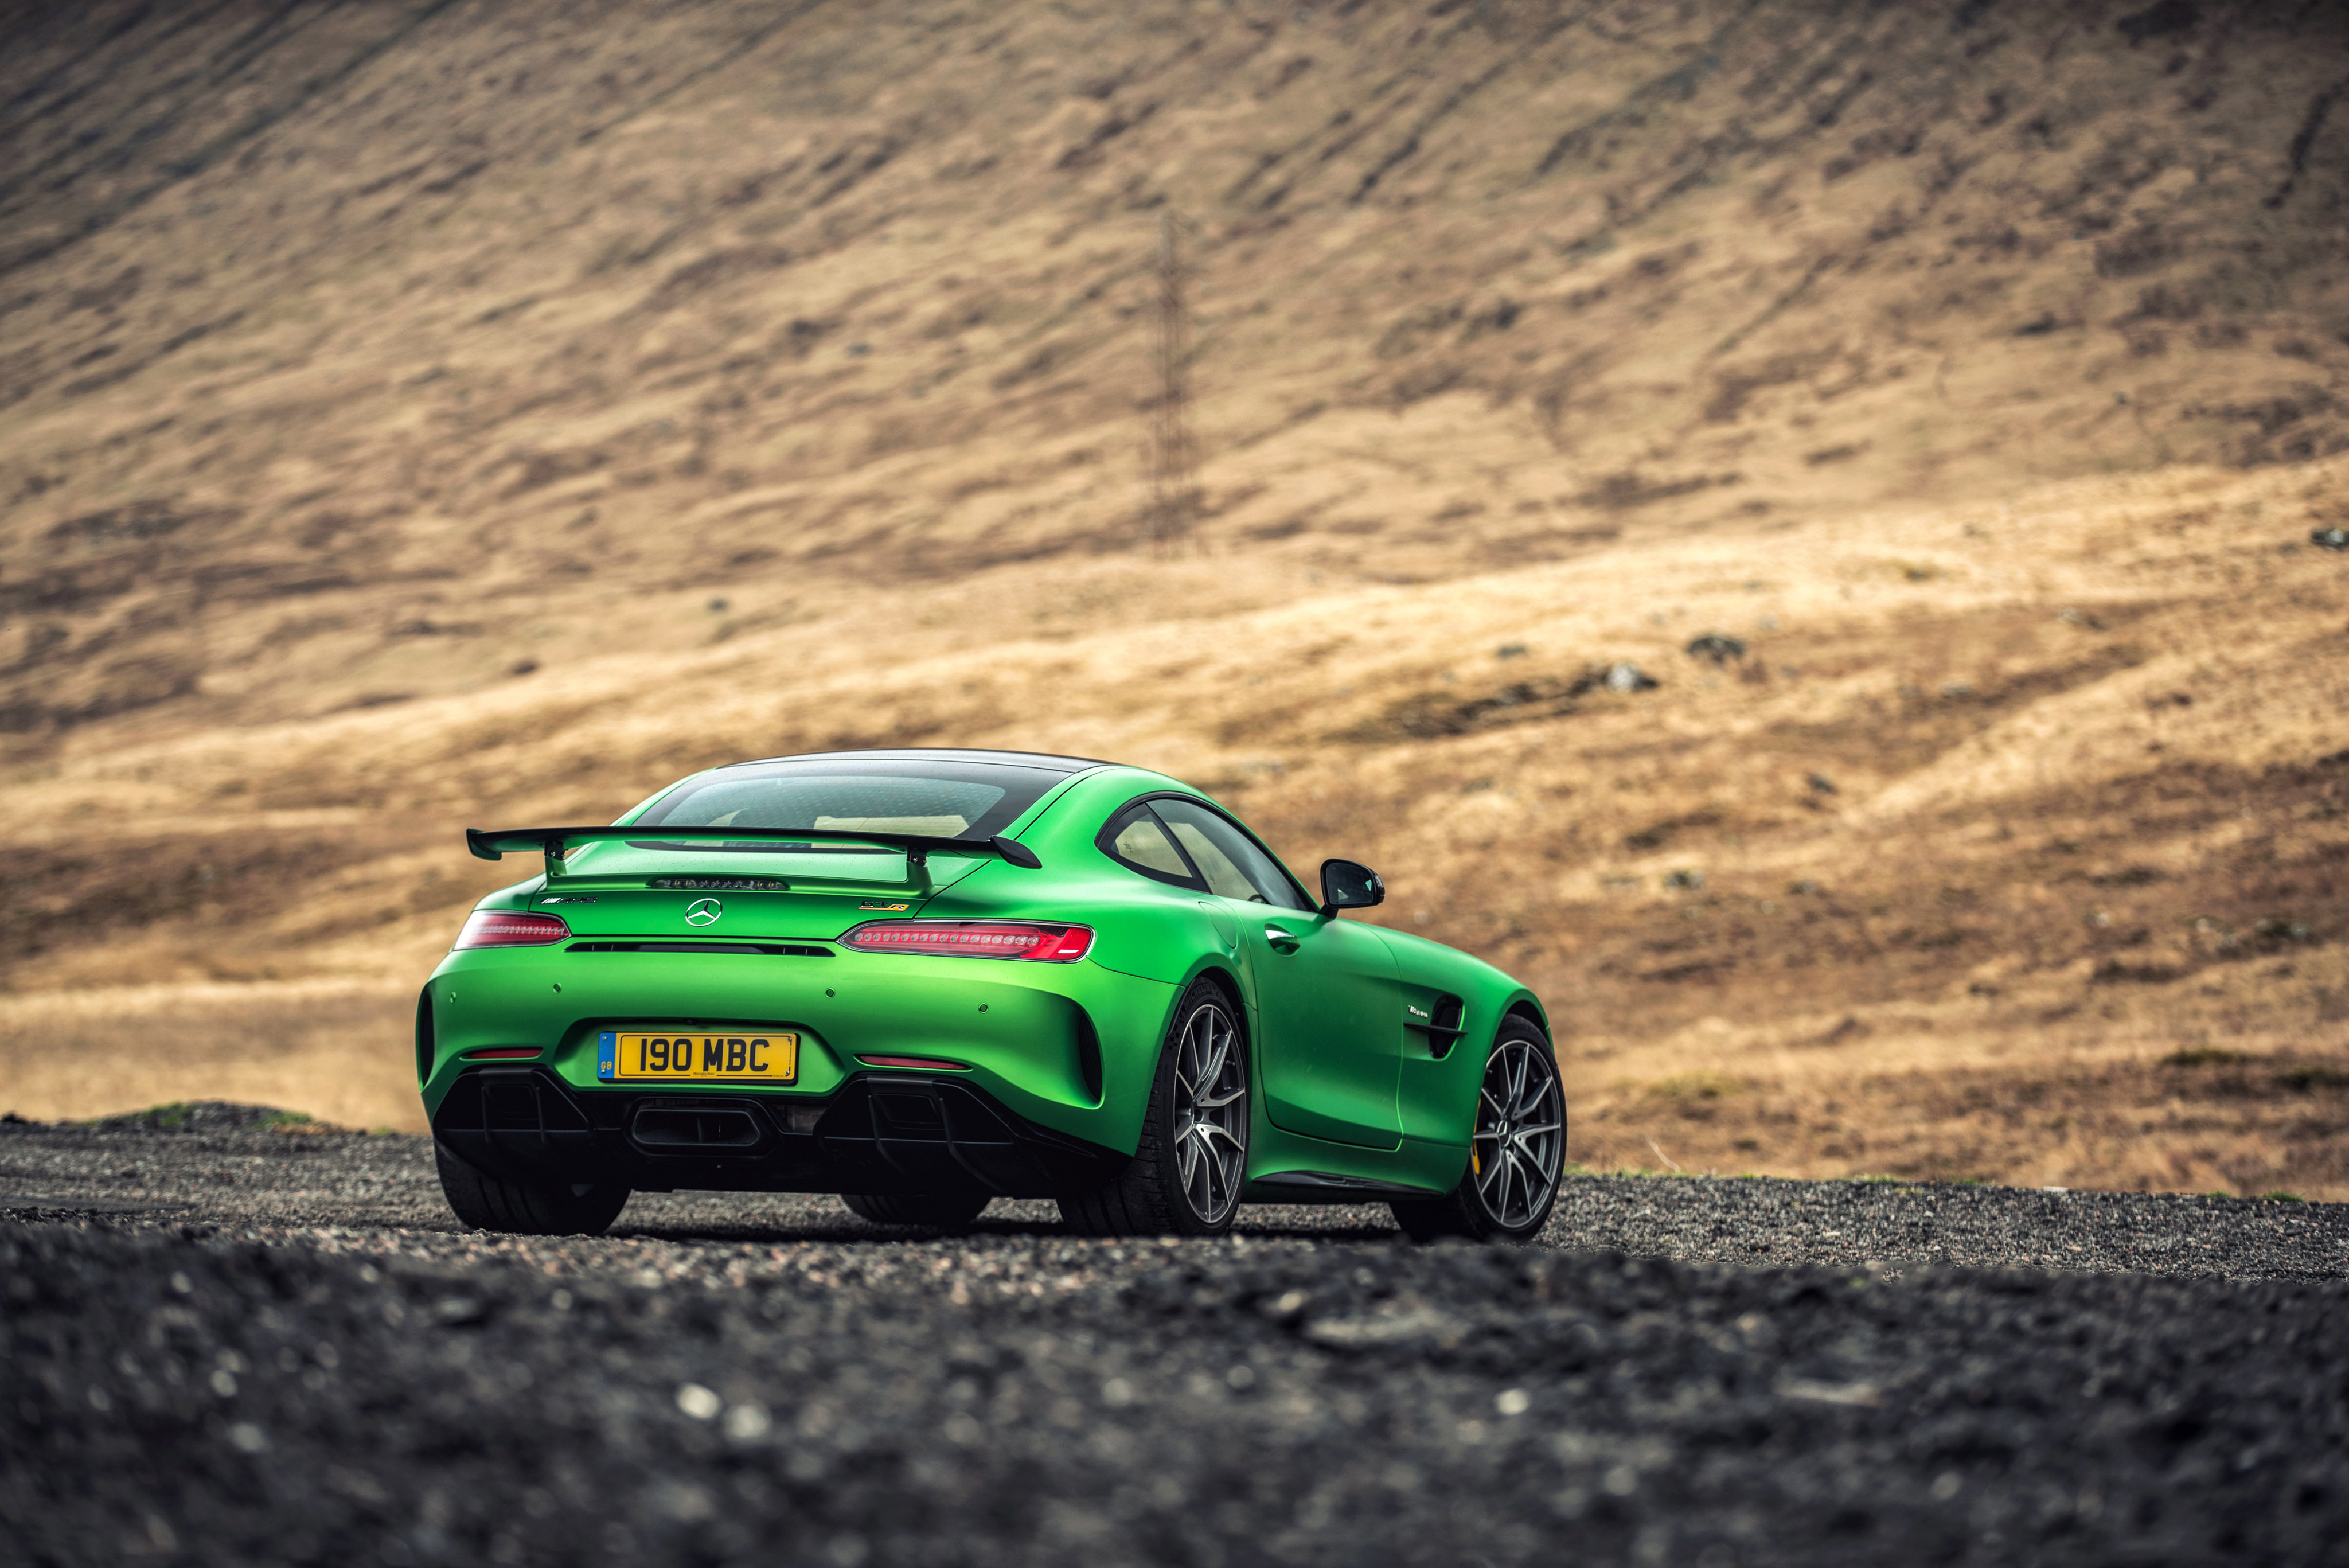 Mercedes AMG GT R C190 4k, HD Cars, 4k Wallpapers, Images, Backgrounds